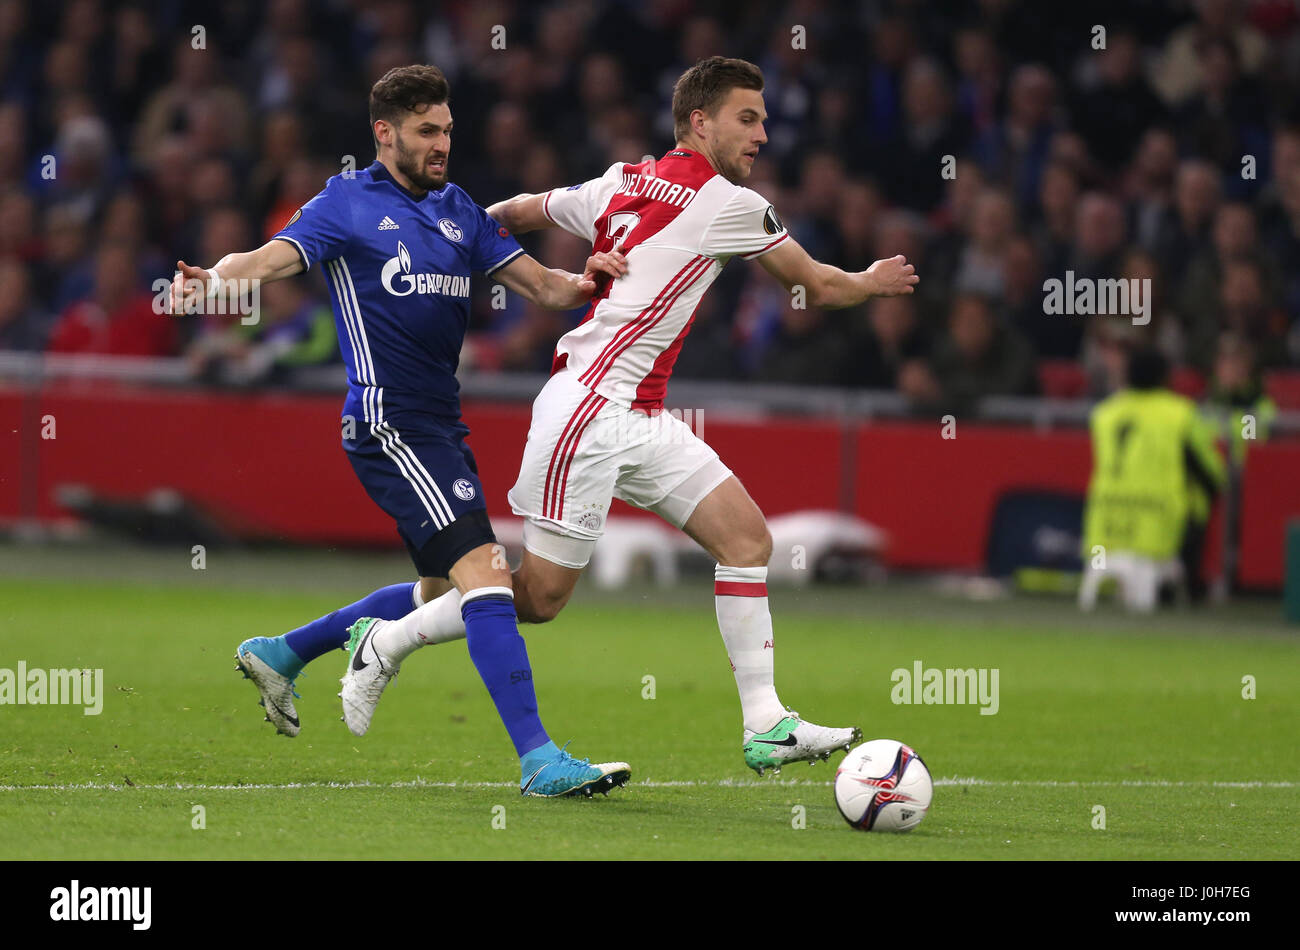 Amsterdam, Netherlands. 13th Apr, 2017. Schalke's Daniel Caligiuri and Ajax's Joel Veltman (R) vie for the ball during the first leg of the Europa League quarter final match between AFC Ajax and FC Schalke 04 in the Amsterdam Arena in Amsterdam, Netherlands, 13 April 2017. Photo: Ina Fassbender/dpa/Alamy Live News Stock Photo